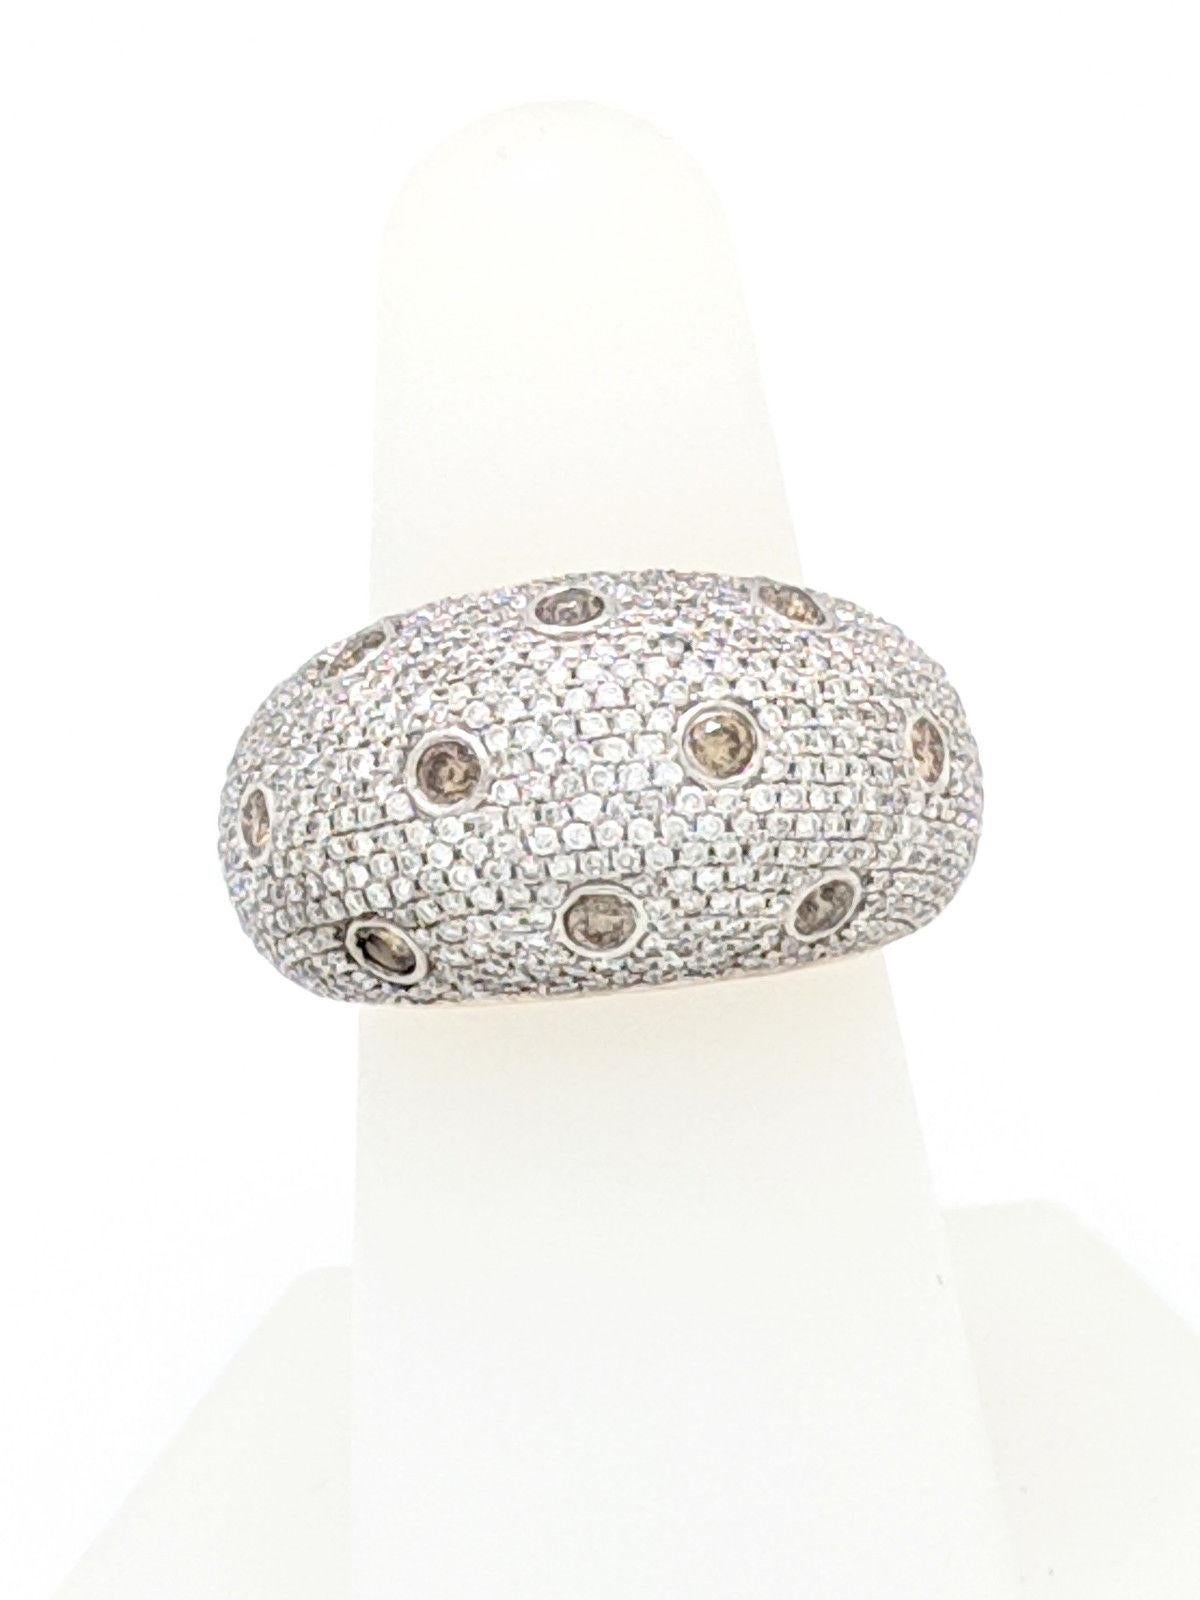 14K White Gold 2.05tcw White & Champagne Pave Diamond Dome Ring

You are viewing a beautiful pave diamond right hand ring. This ring is crafted from 14k yellow gold and weighs 10.6 grams. The top of the ring measures 13.5mm in width and the bottom